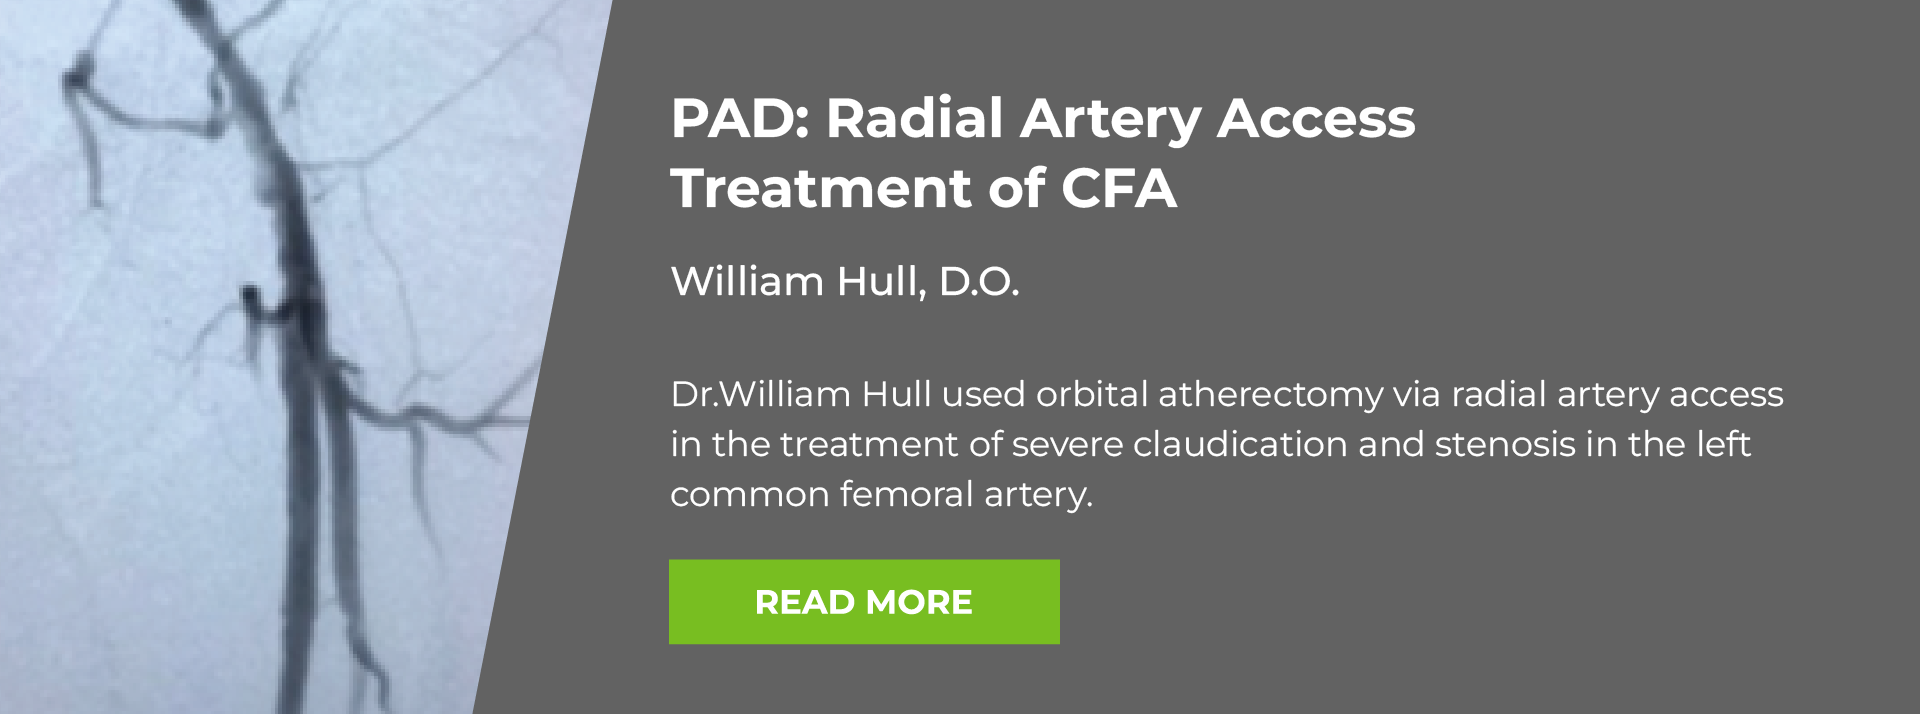 One Solution Case Study. P A D: Radial Artery Access Treament of C F A